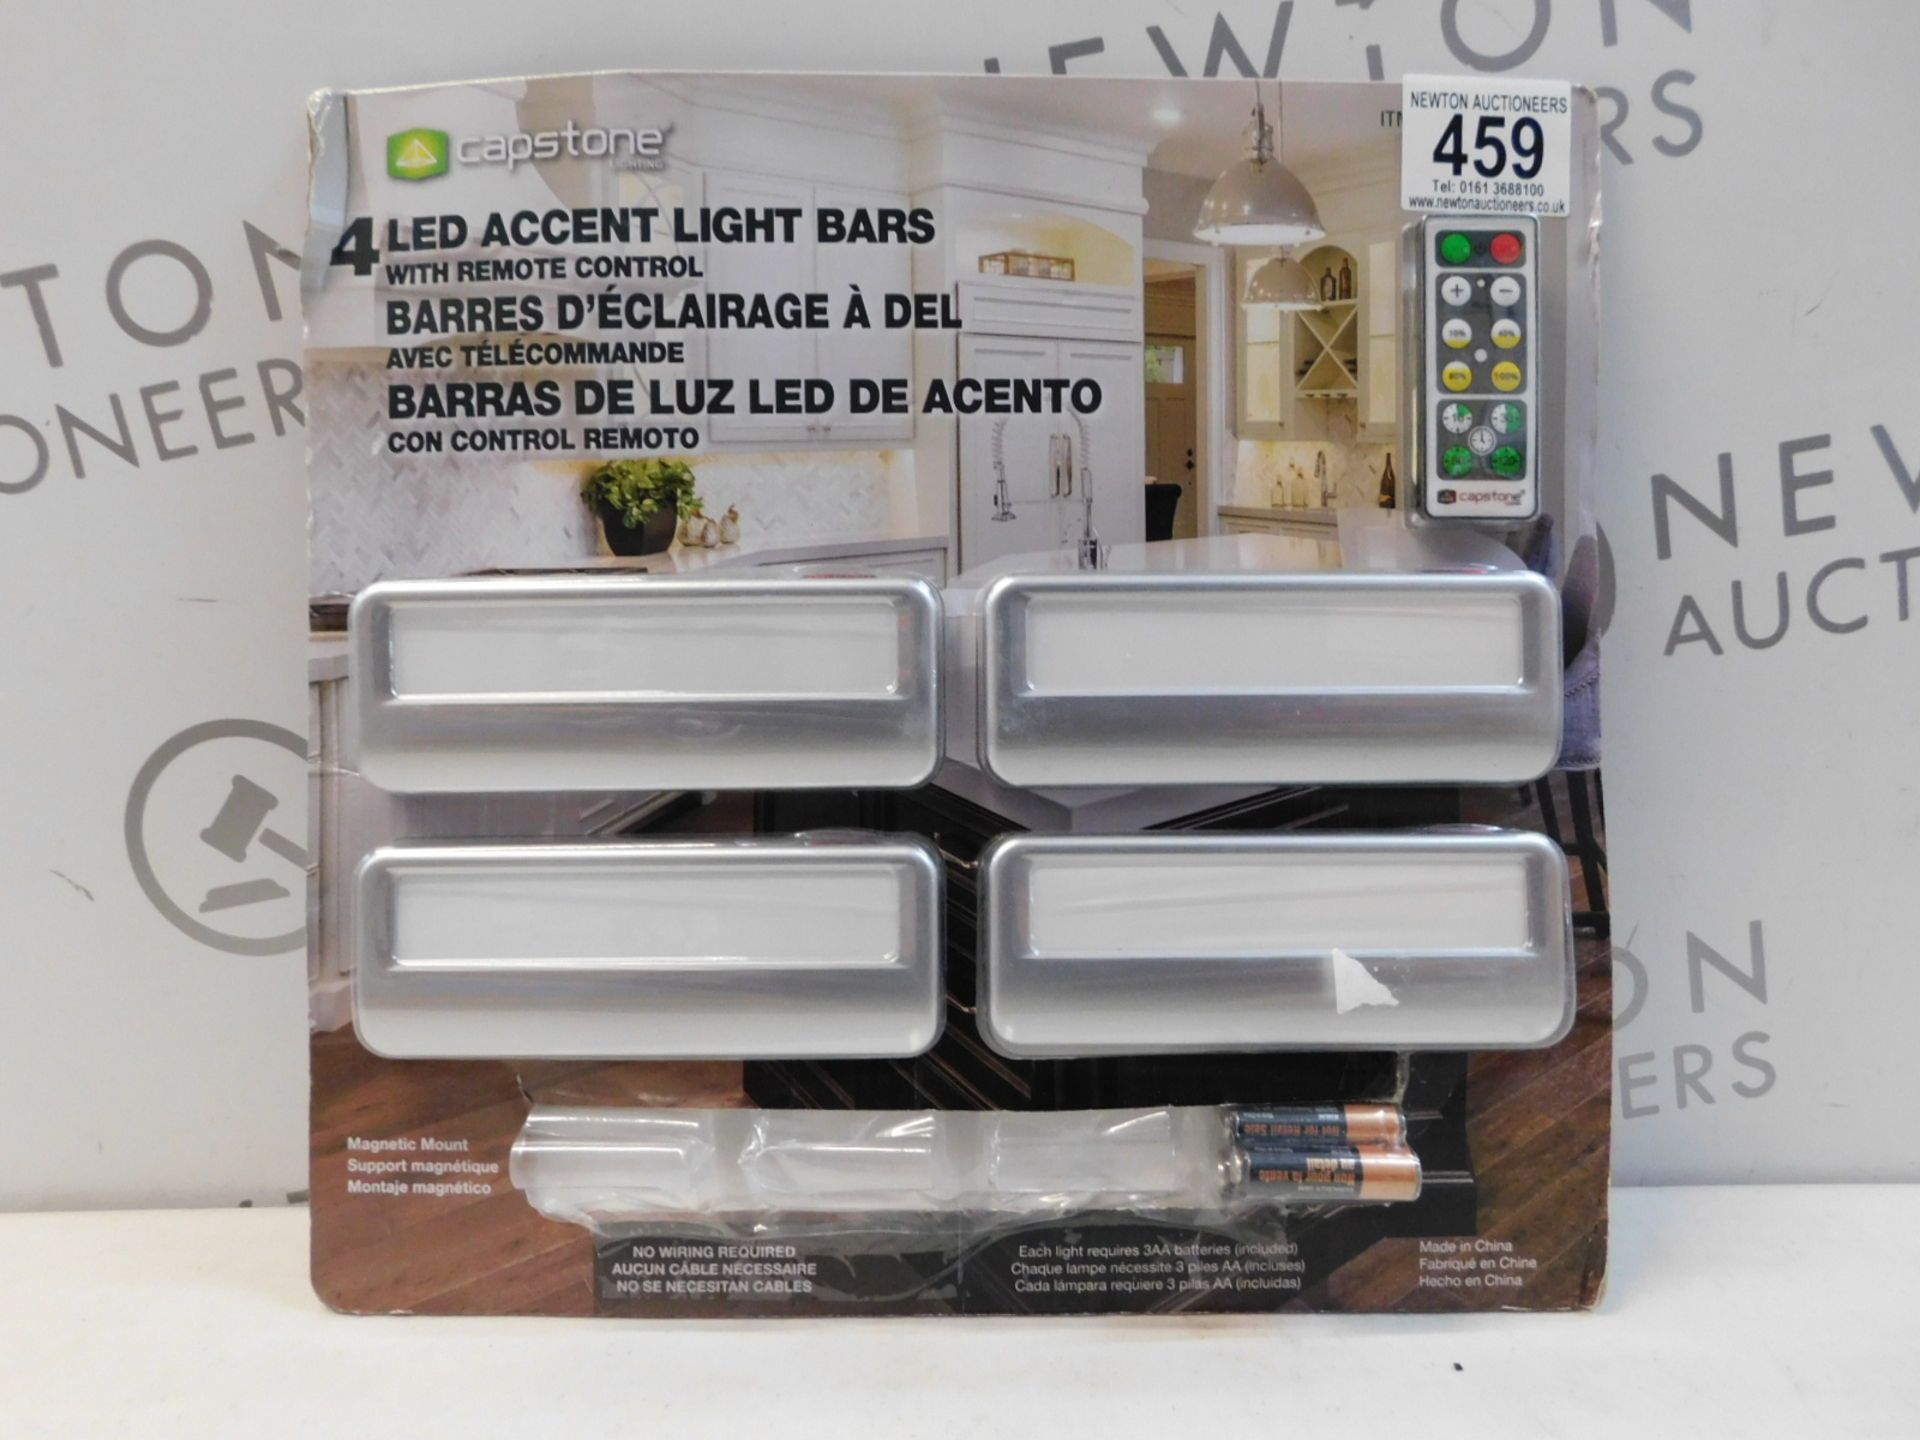 1 PACK OF 4 CAPSTONE LED ACCENT LIGHT BARS WITH BATTERIES & REMOTE CONTROL RRP Â£39.99